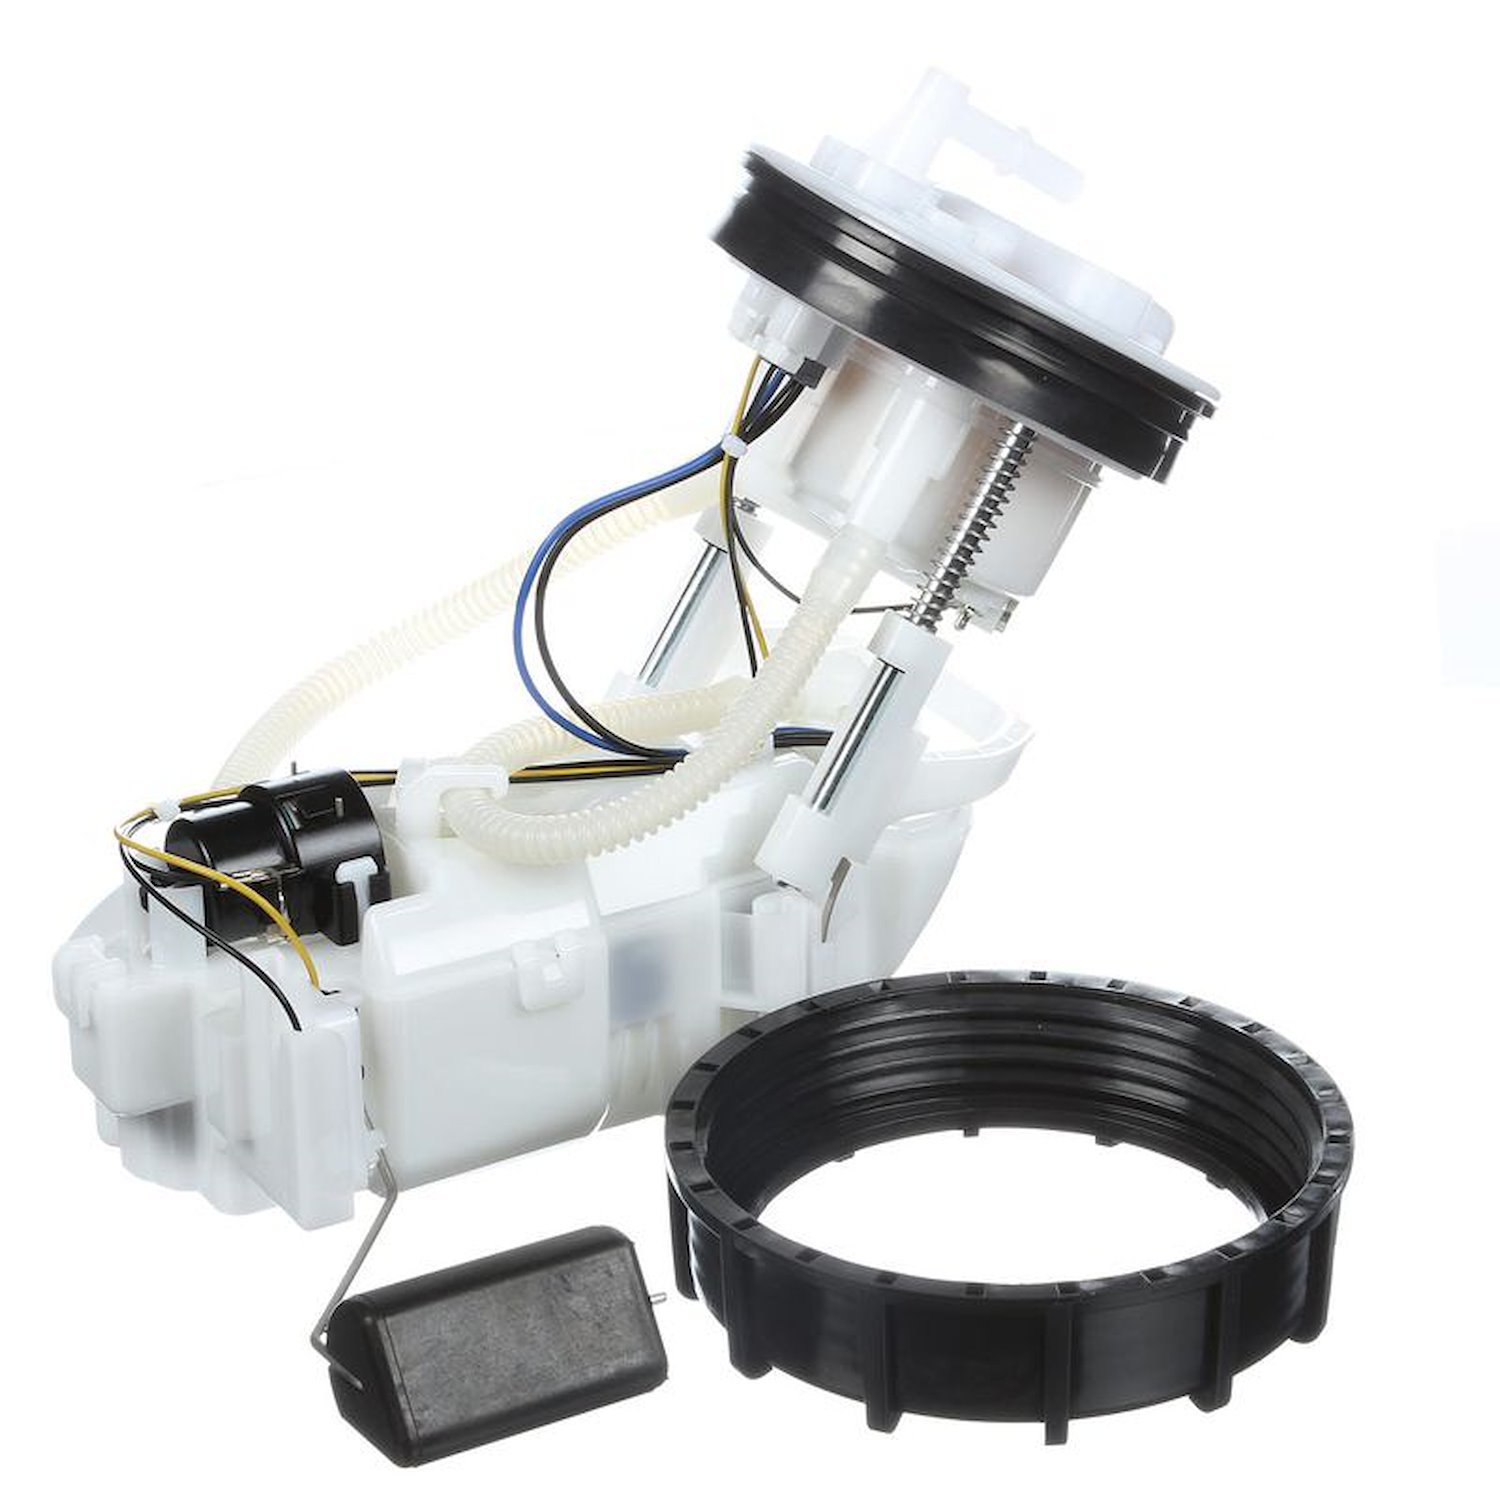 OE Replacement Fuel Pump Module Assembly for 2005-2010 Honda Odyssey